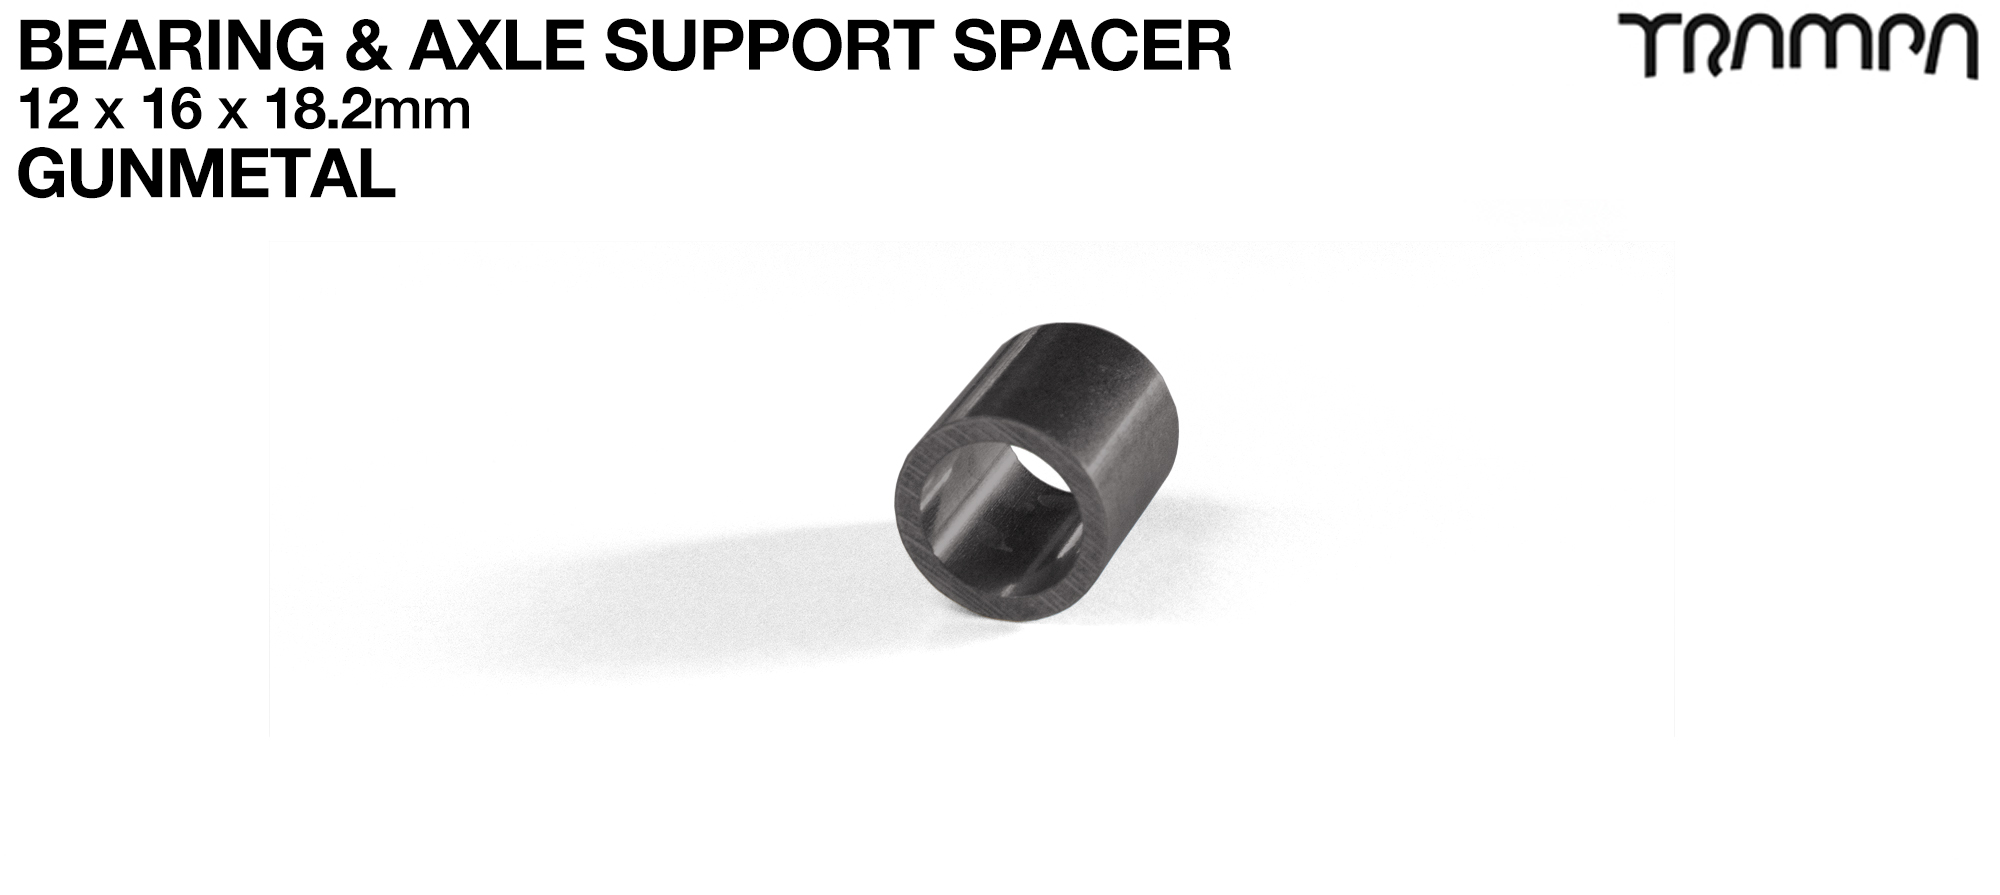 Wheel support spacer for all TRAMPA Wheels on 12mm ATB Axles - CNC precision 12mm x 16mm x 18.2mm  - GUNMETAL